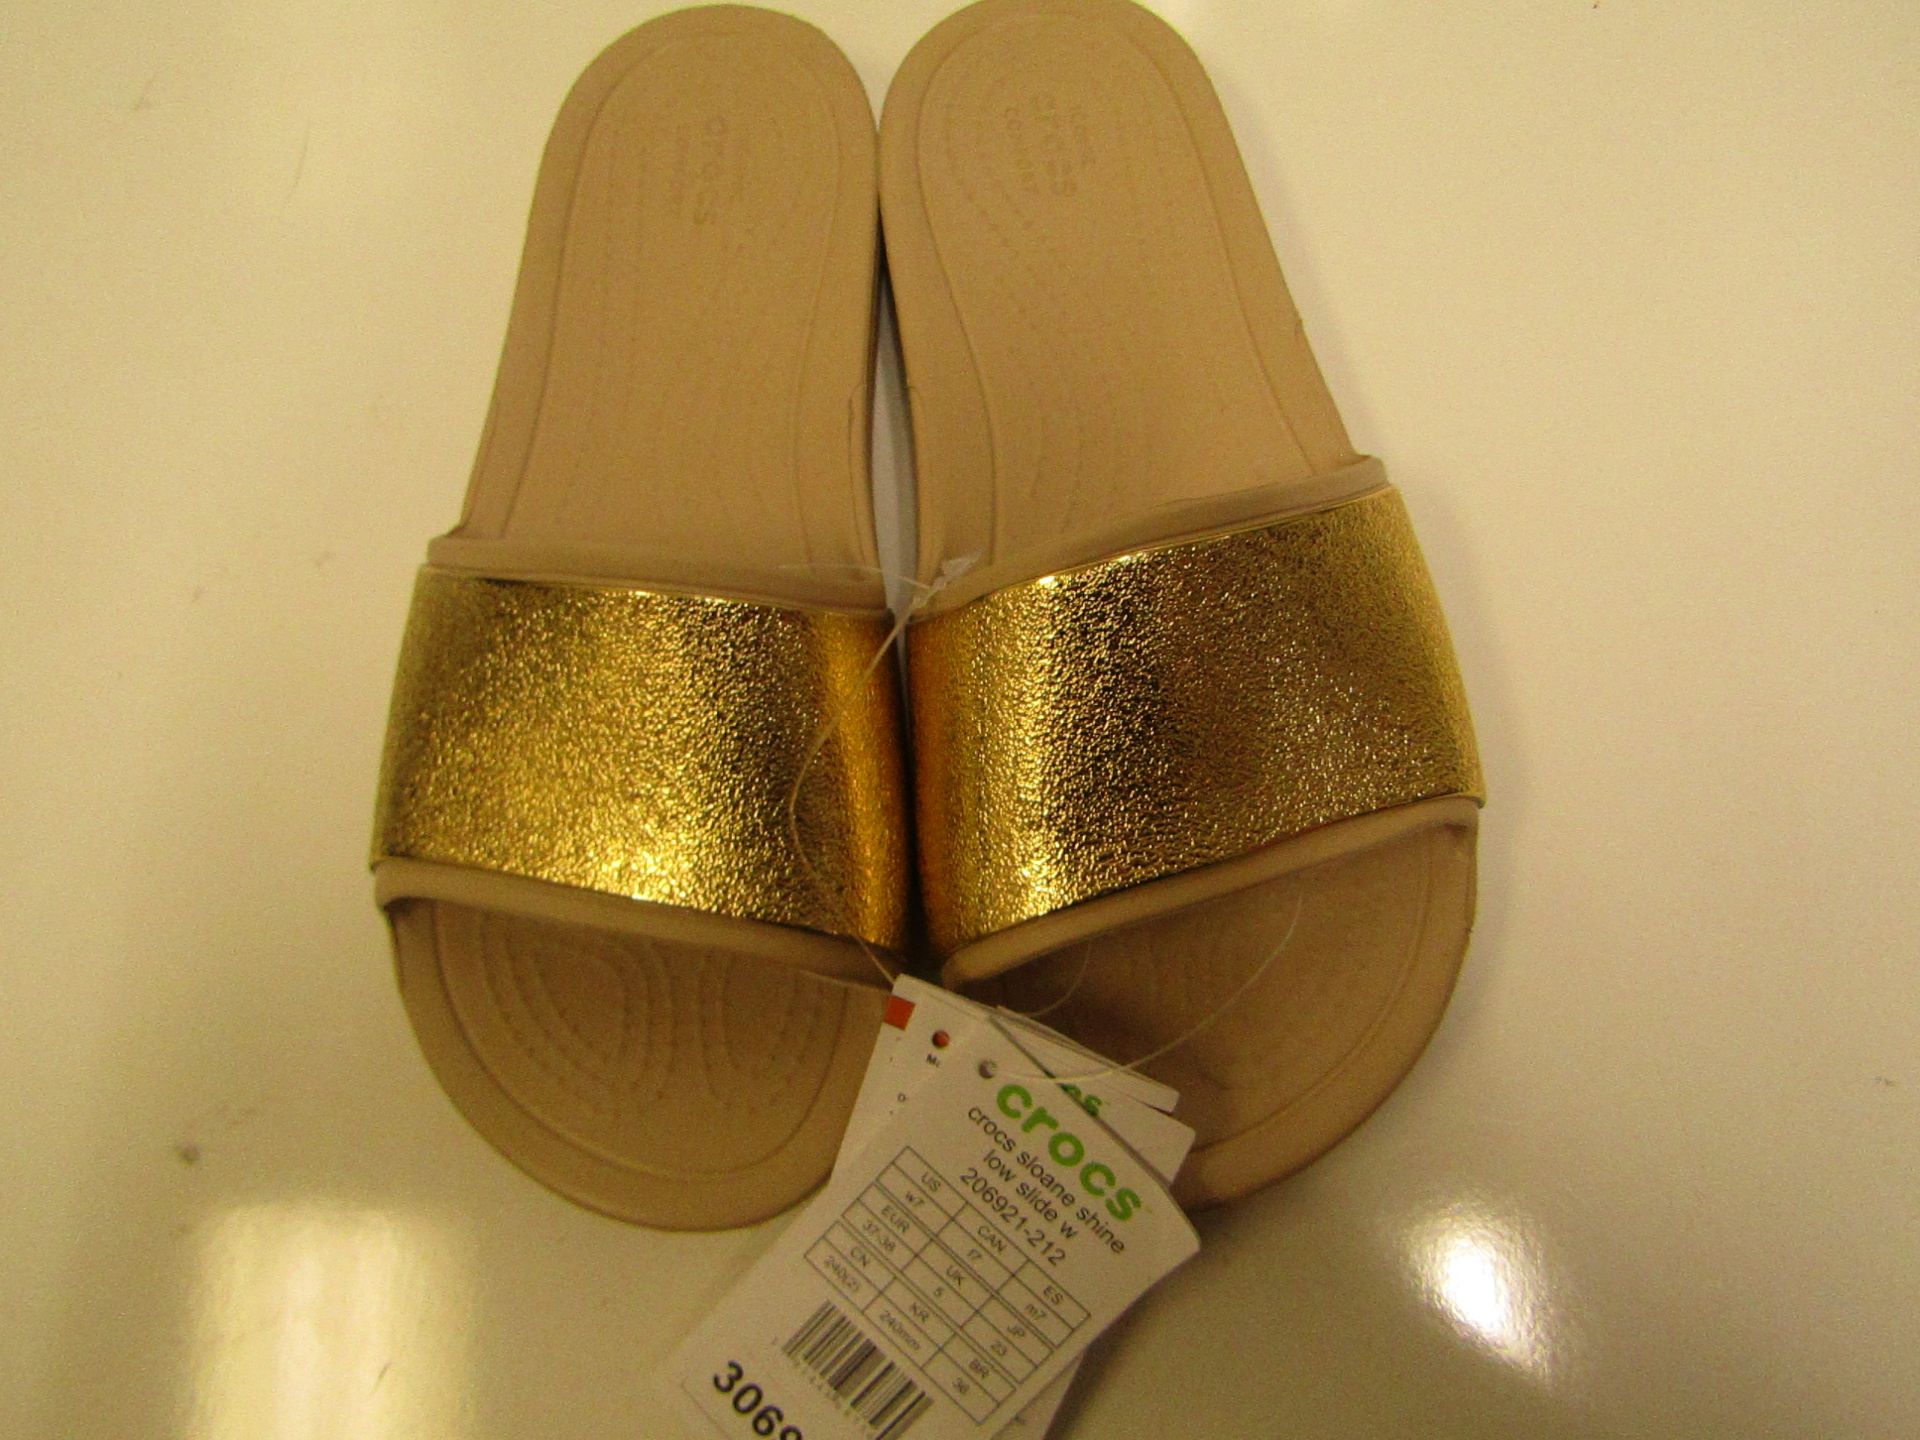 Crocs Sloane Low Sliders - UK Size 5 - Gold & Cream RRP £29.99 New With Tags